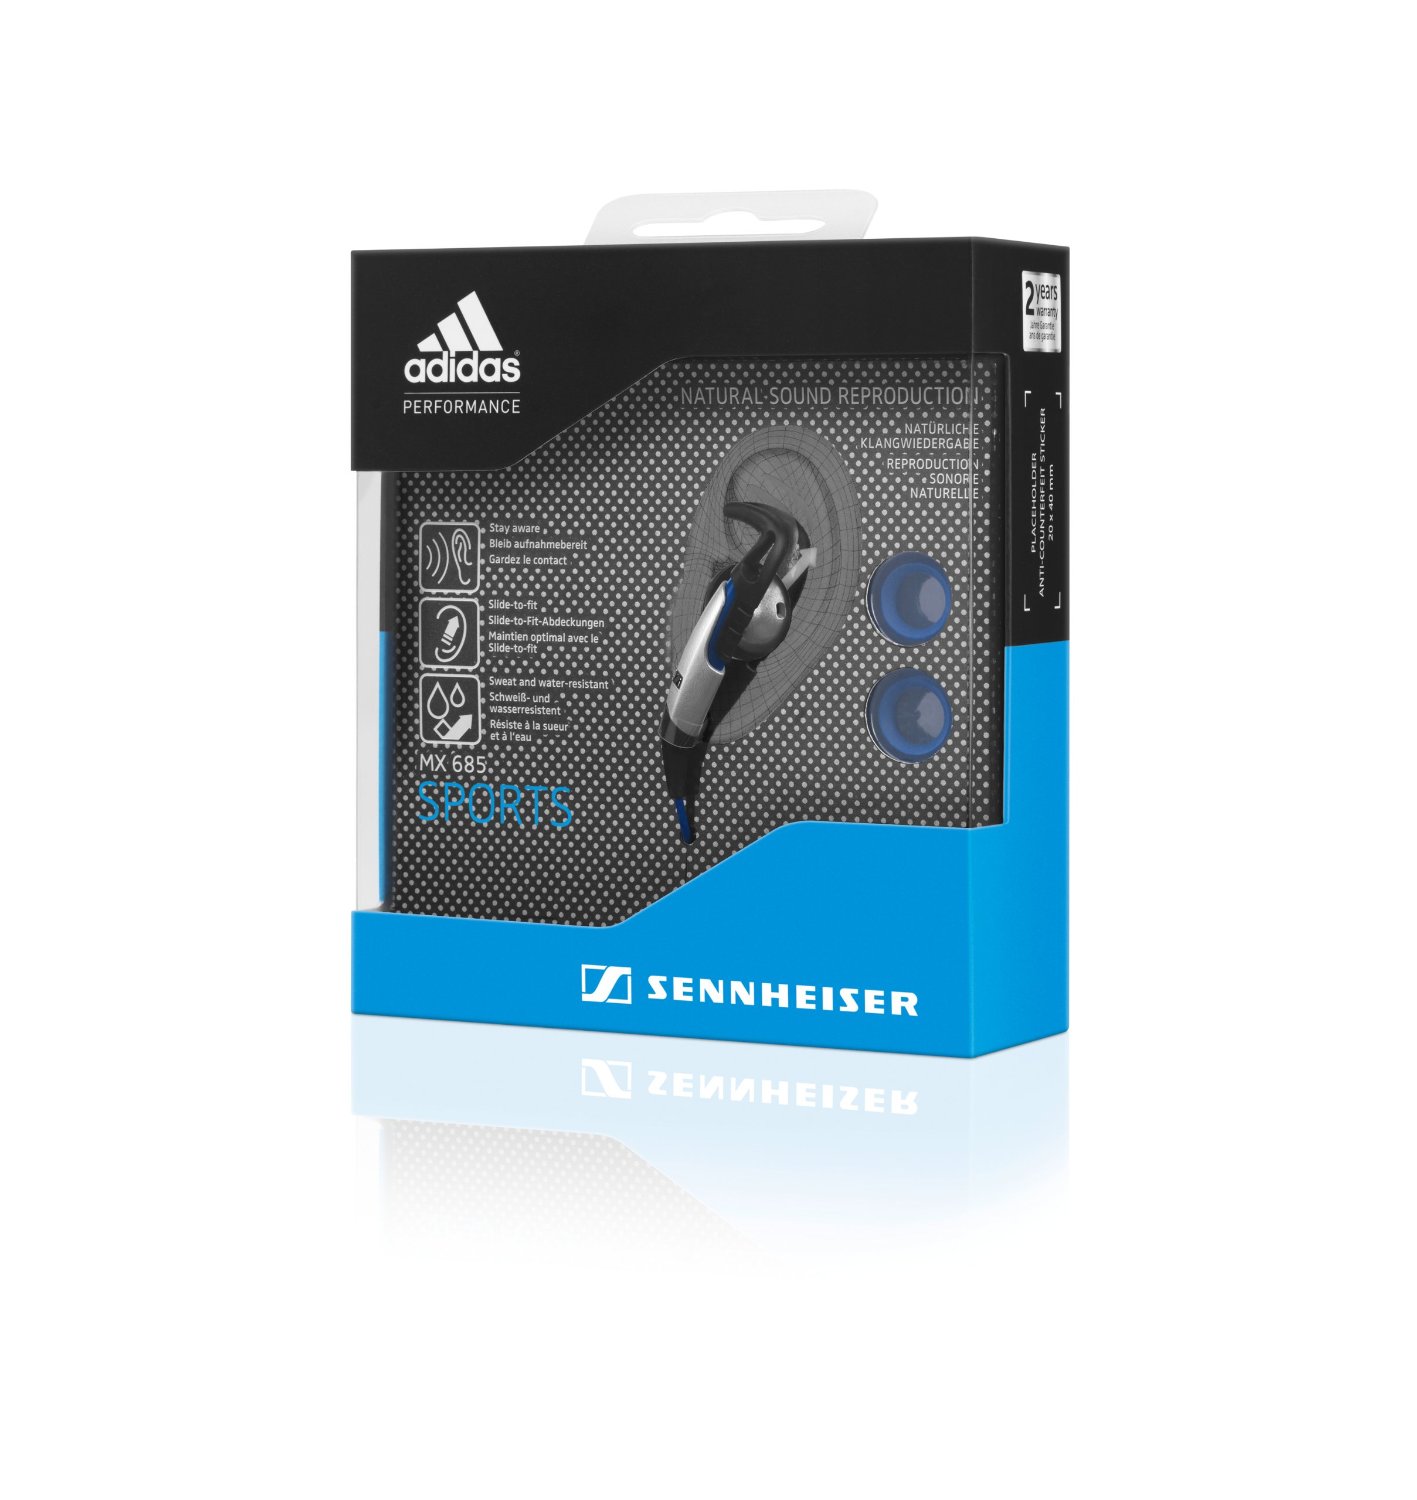 Deportes Adidas MX685 In-Ear auriculares - negro